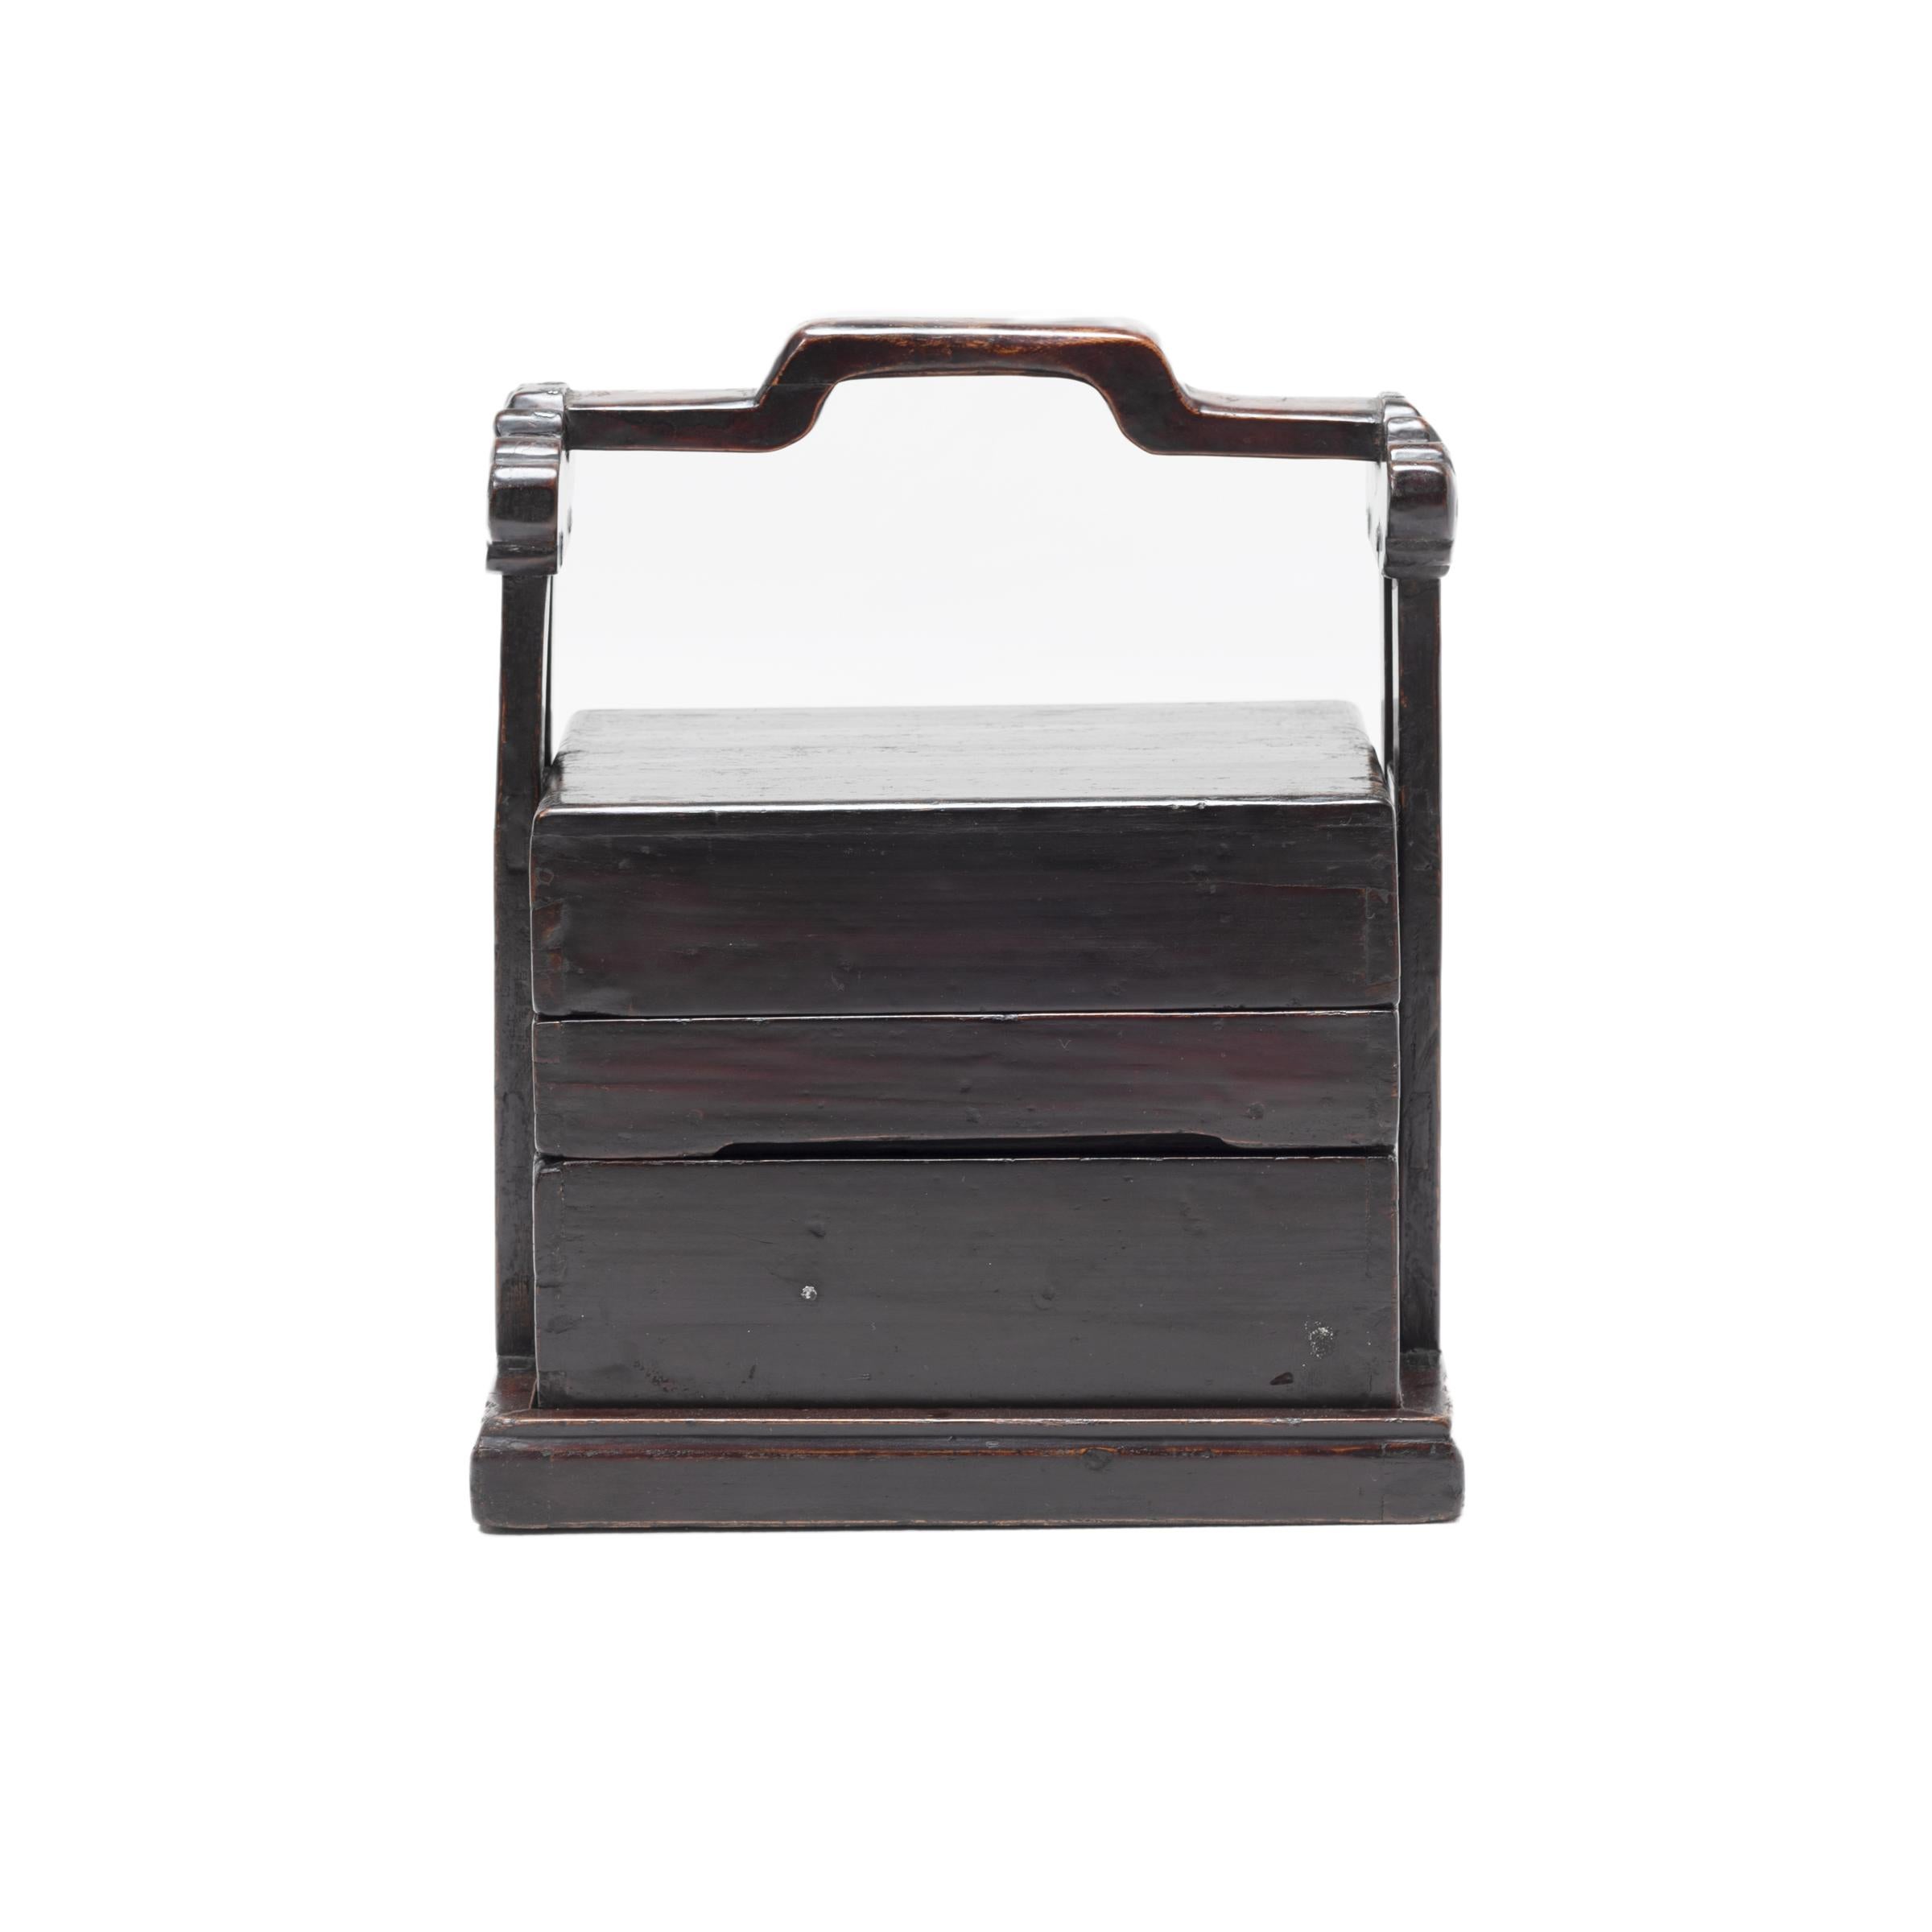 The basic form of this three-tiered rosewood box with handle has remained unchanged for a thousand years. The lack of formal dining rooms in traditional China prompted families to use stacked boxes to carry food from a remote kitchen to the room